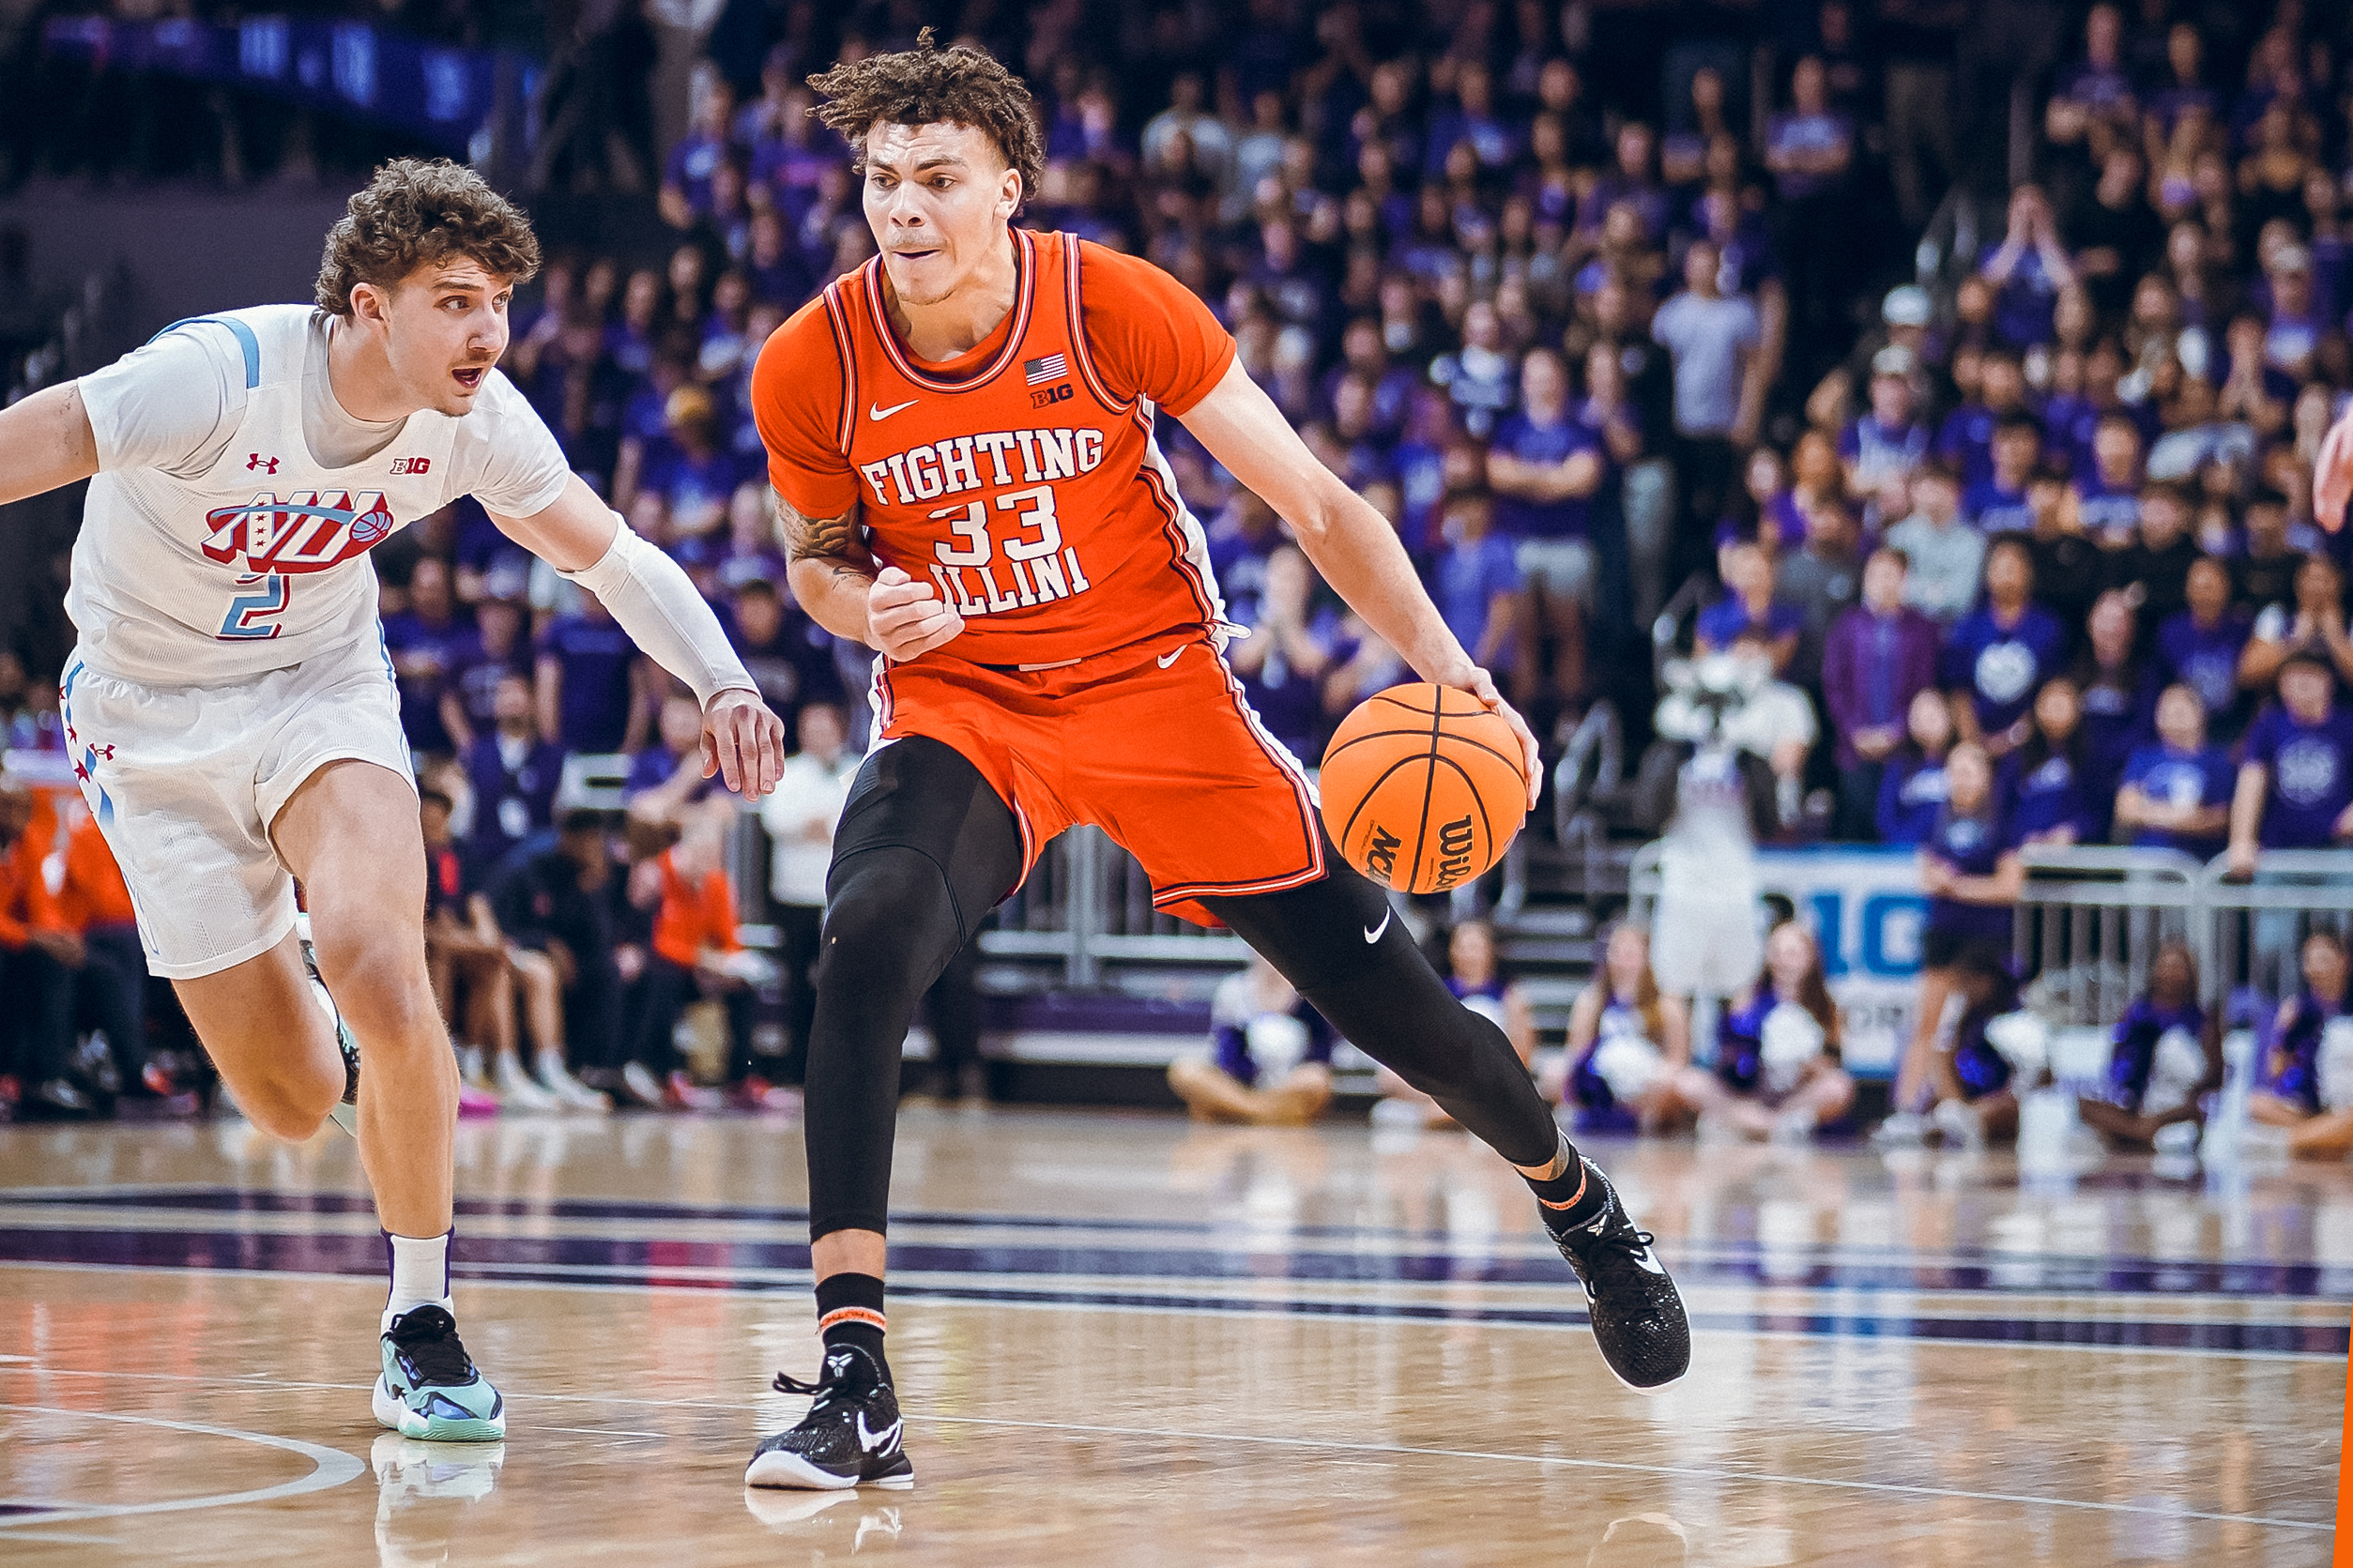 Buie’d: Illinois’ Inability to Guard Northwestern’s Ball Screen Action Leads to Road Loss